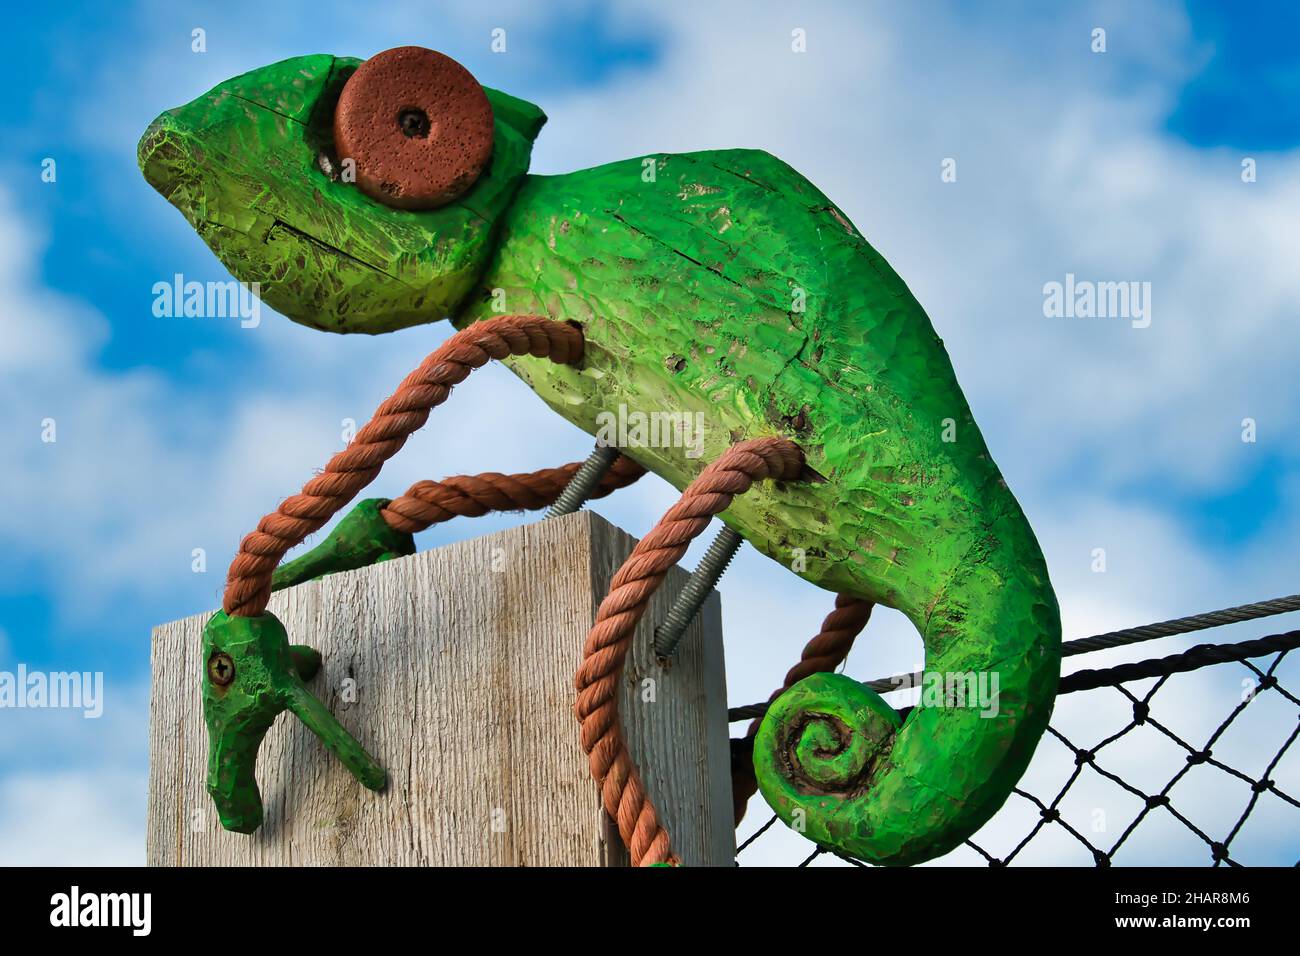 Image of a bright green chameleon, made of driftwood and orange rope. Folk art on a fence near Faro, Algarve, Portugal Stock Photo